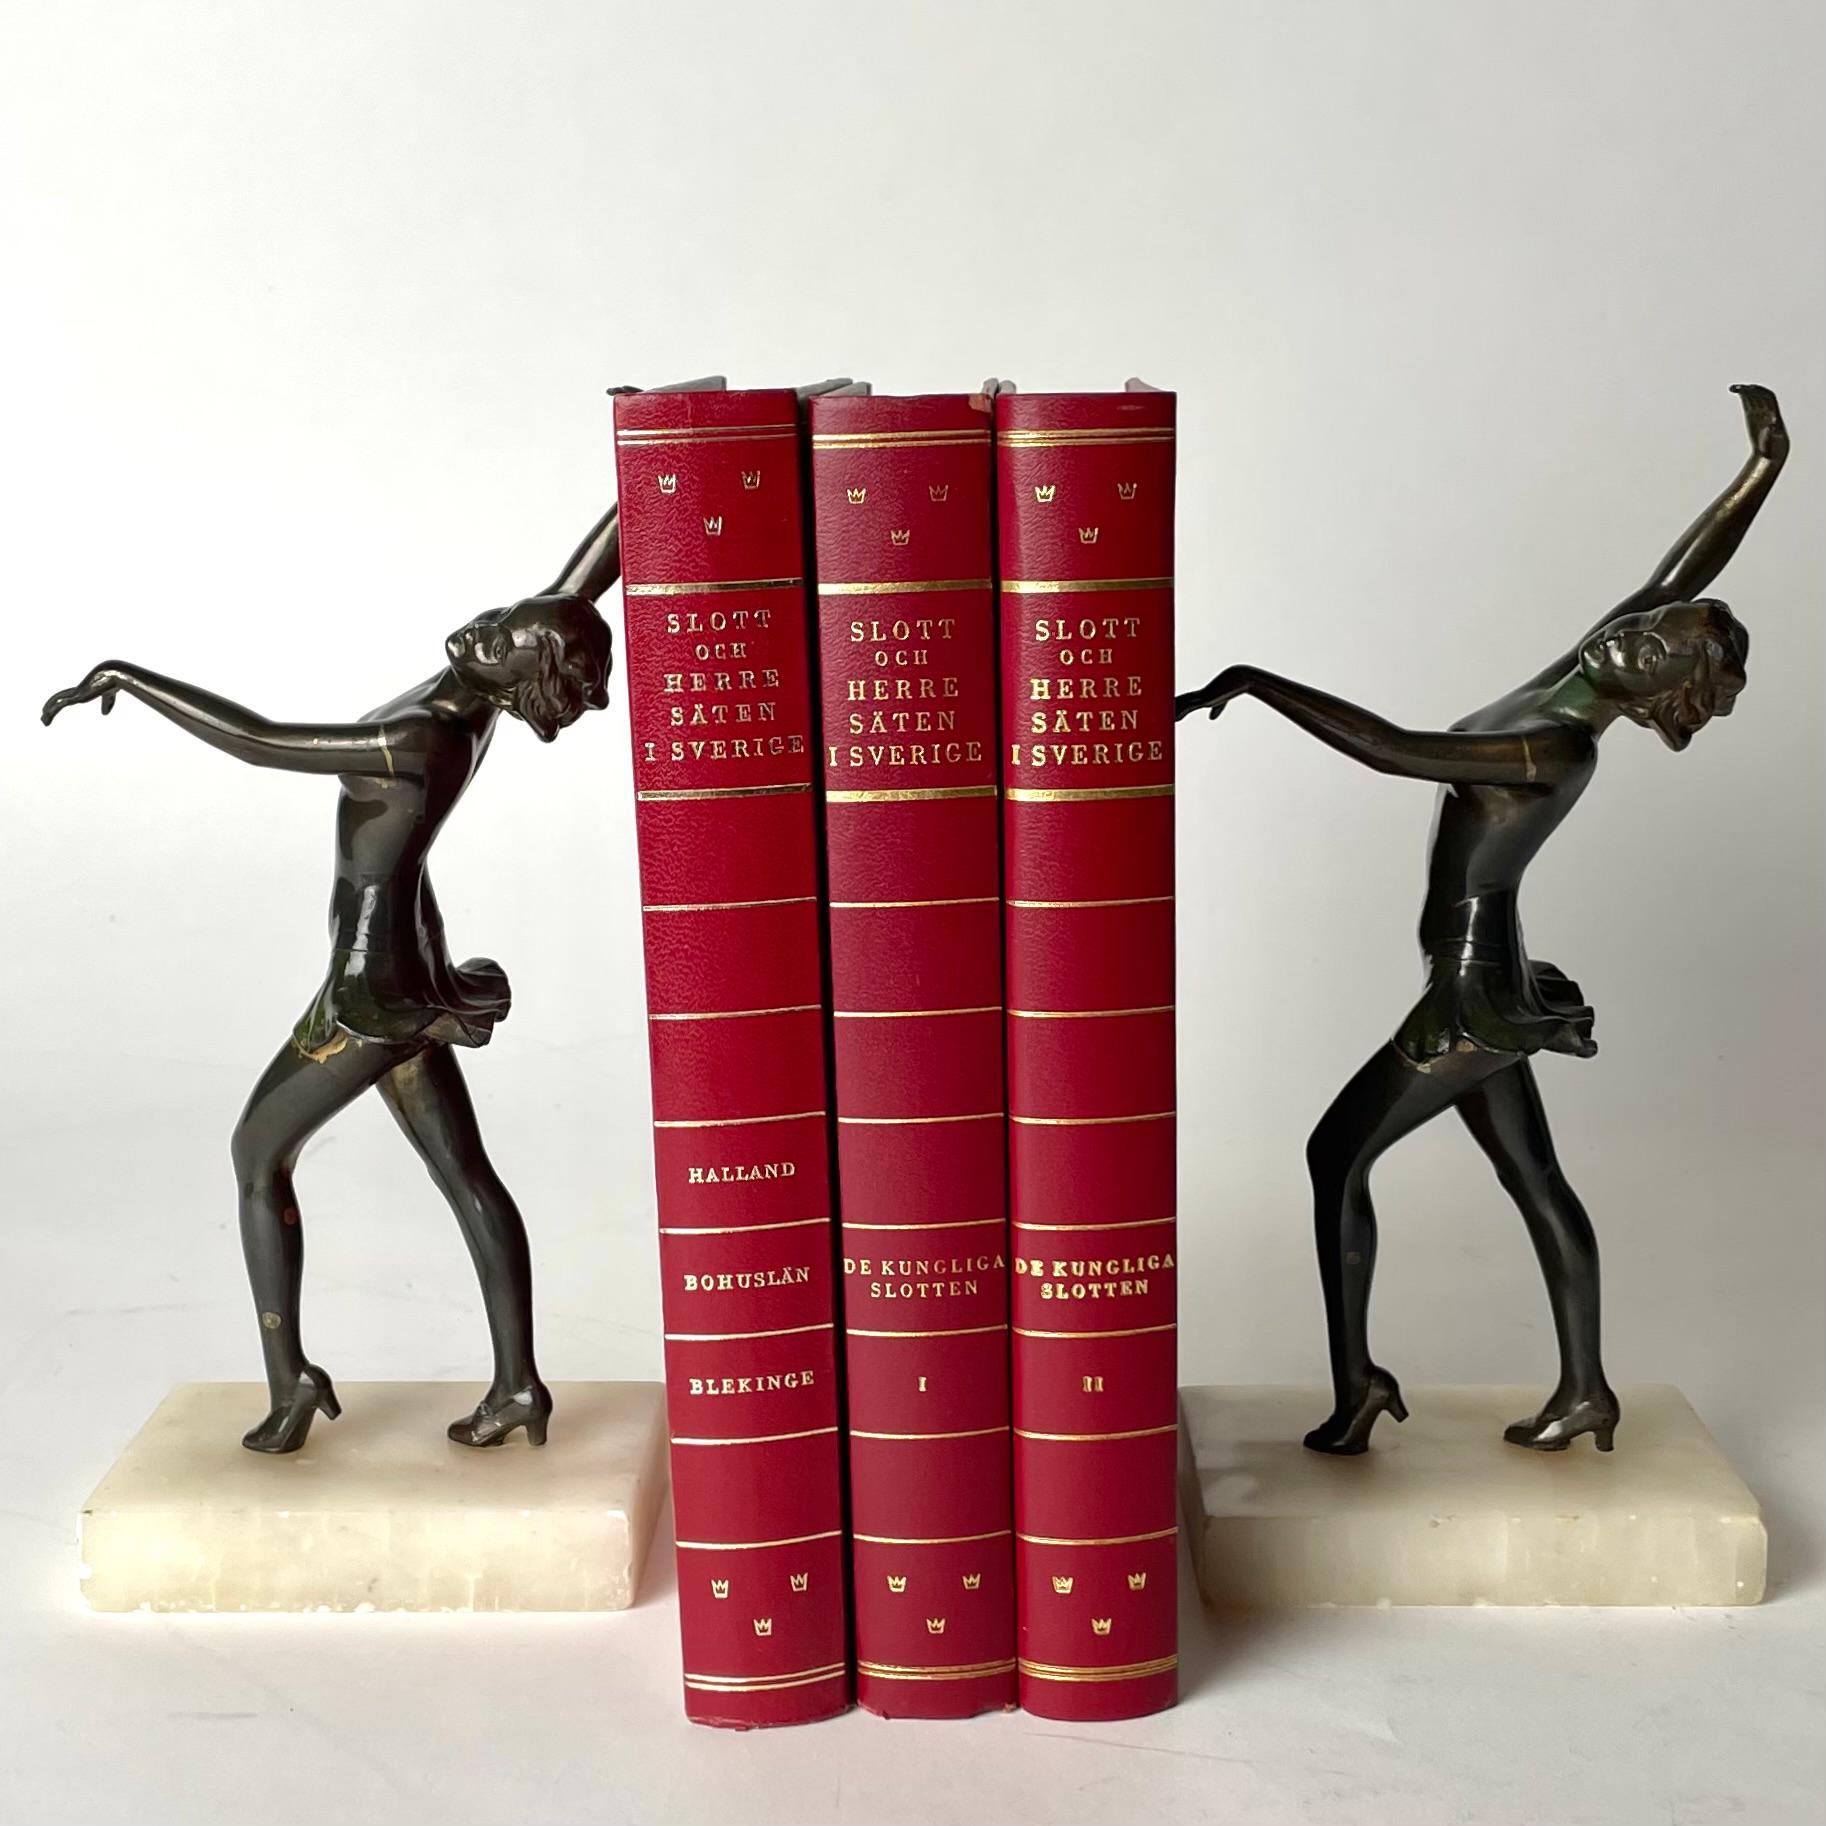 European A pair of period Art Deco Bookends from 1920s-1930s with dancing women.